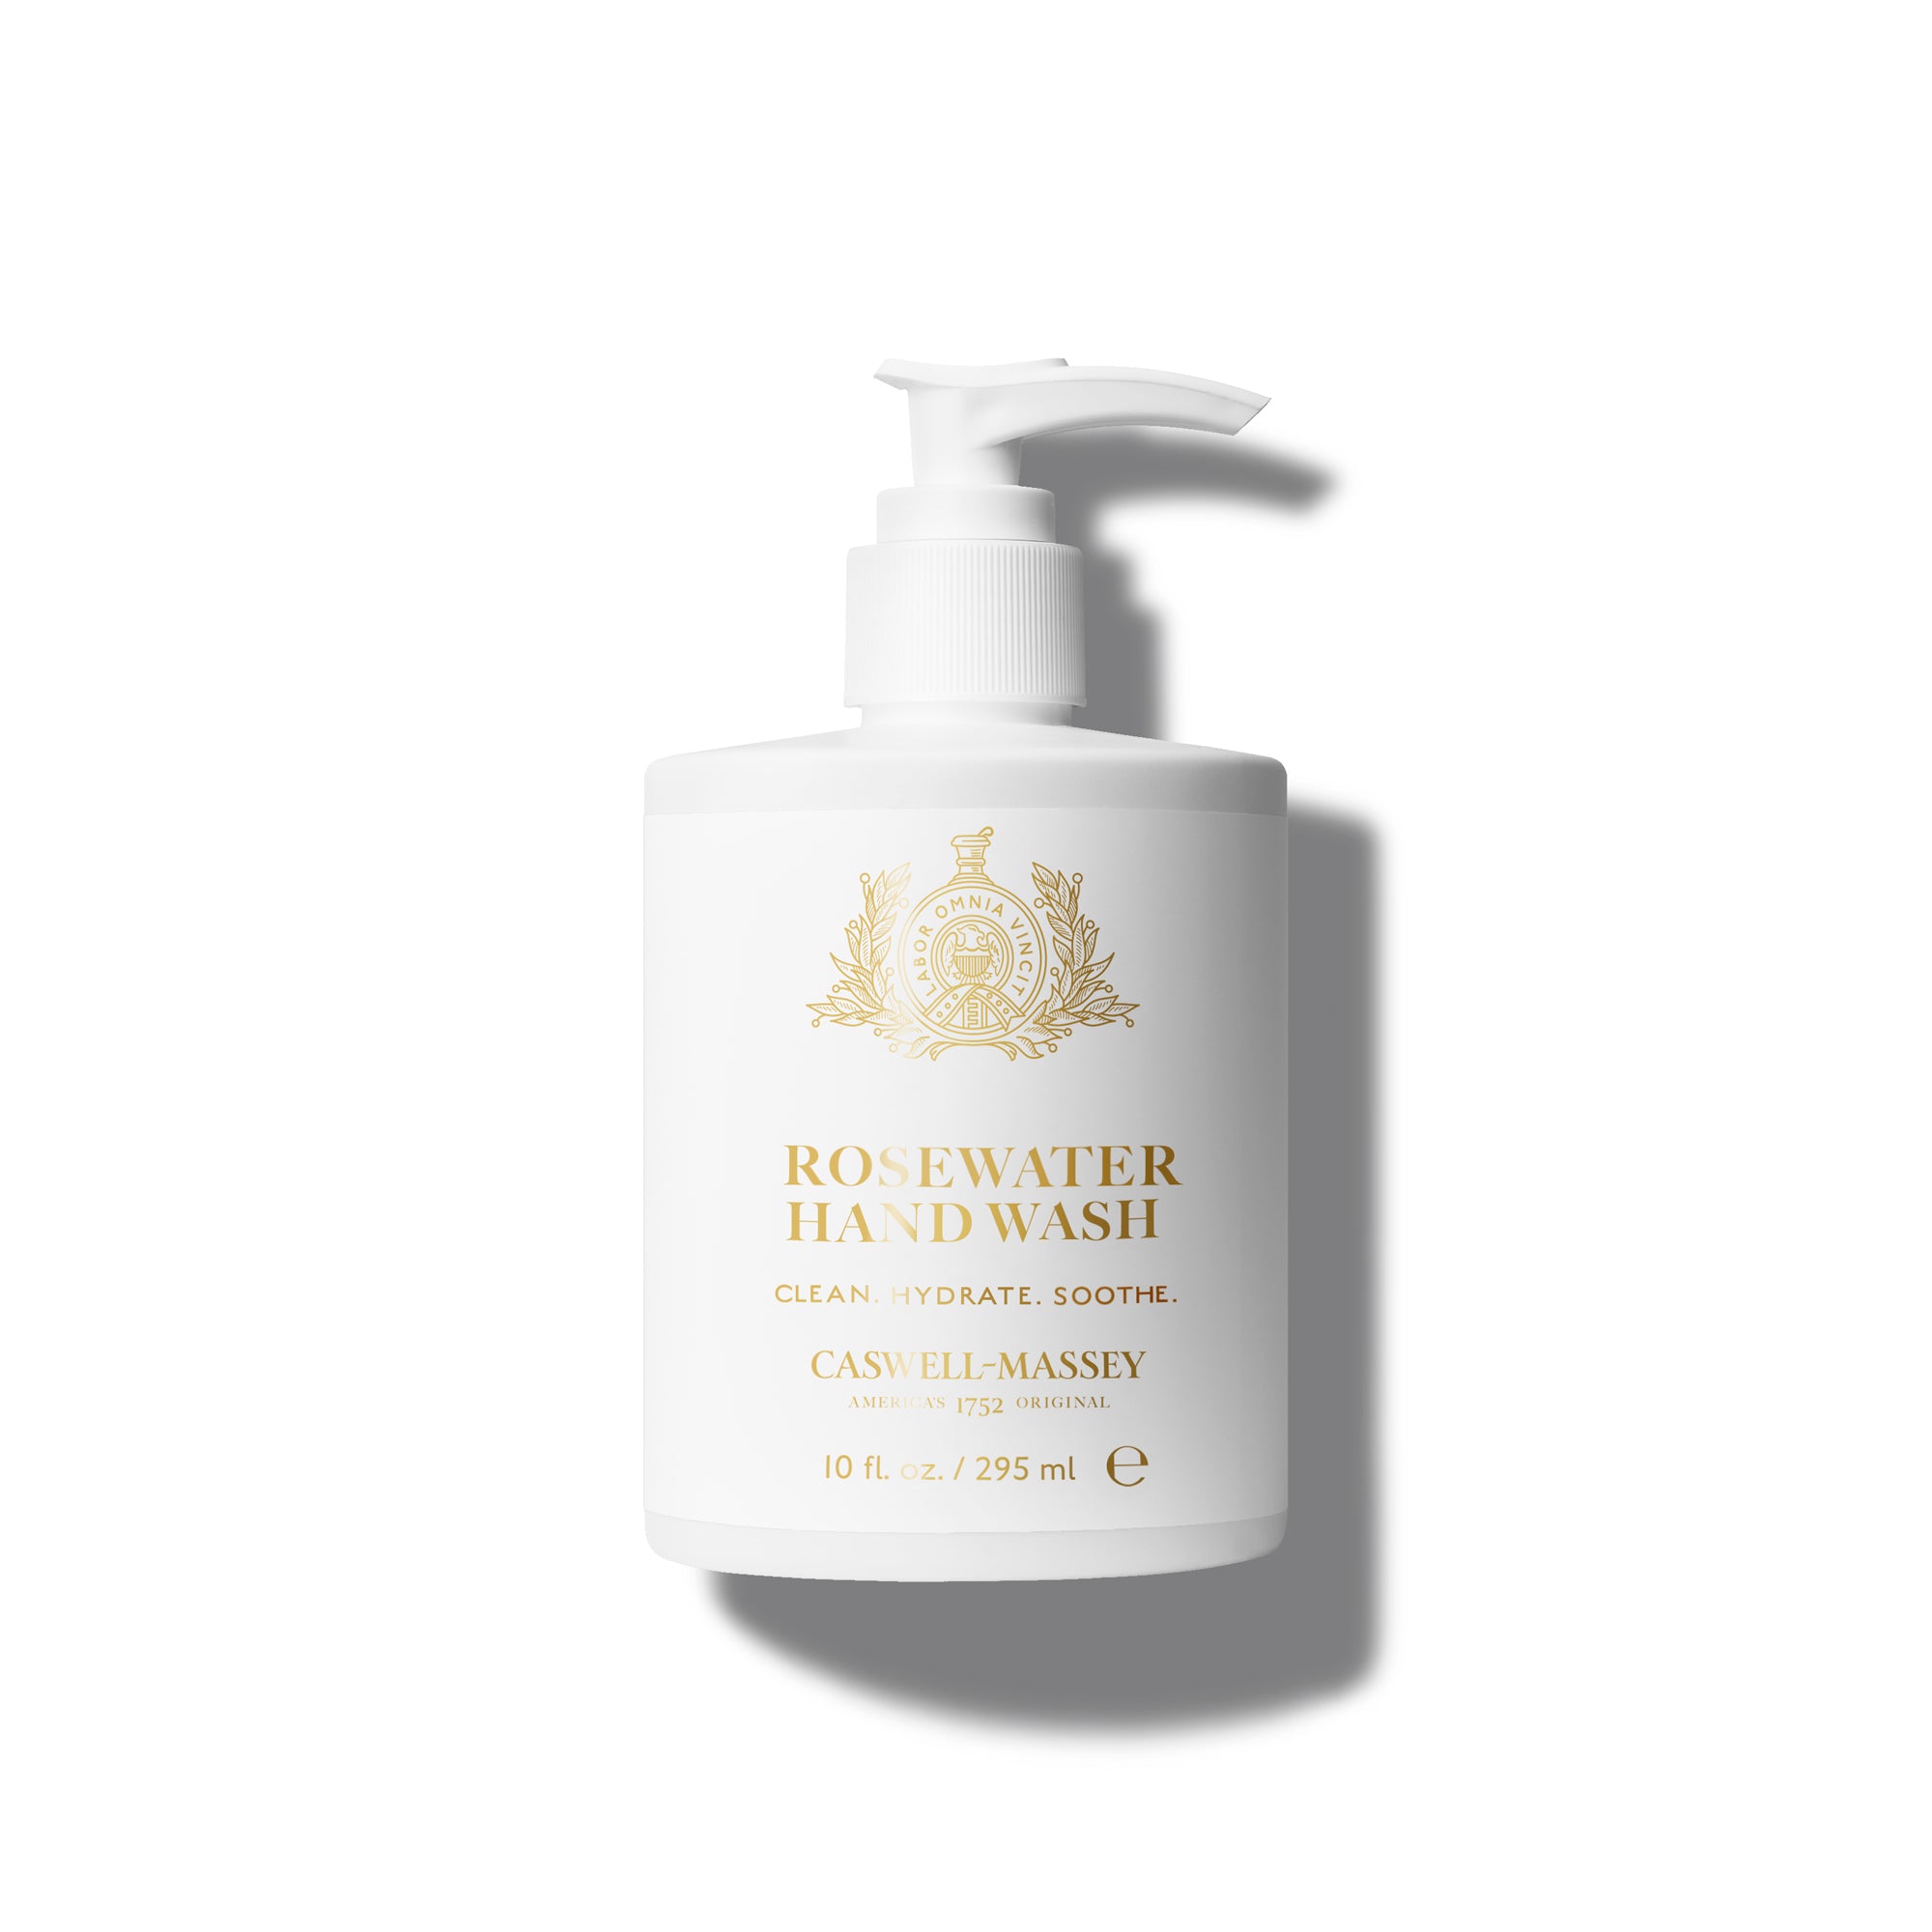 Rosewater Hand Wash in a 10 oz. pump bottle